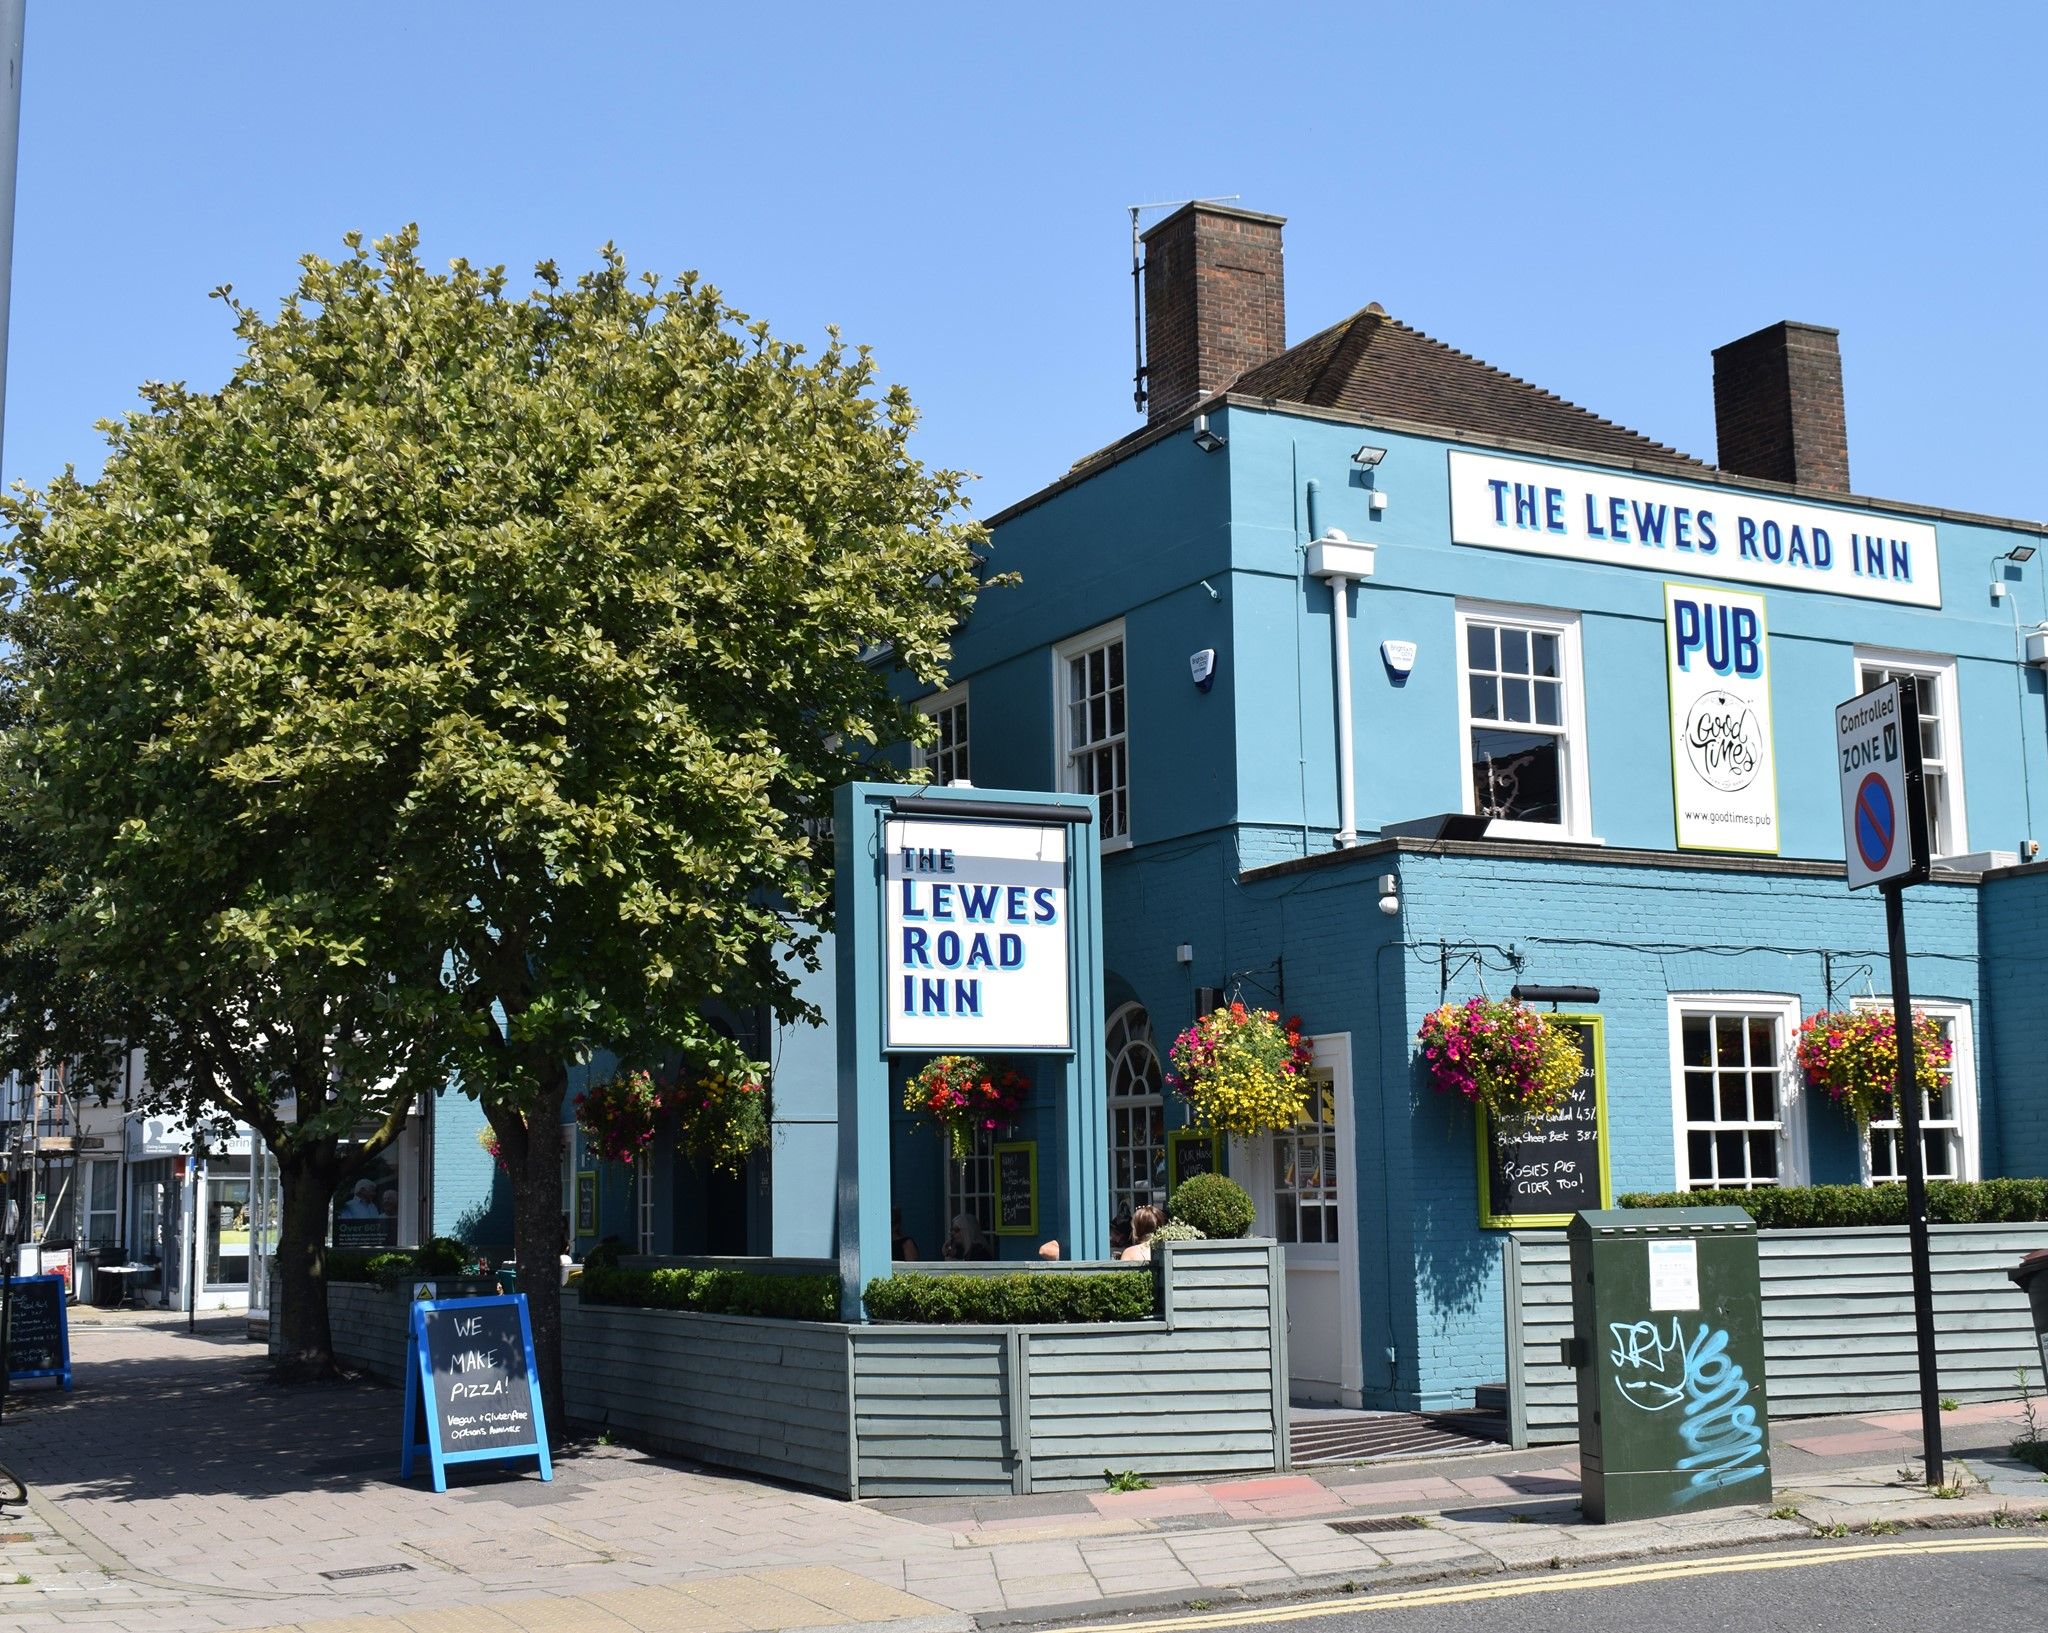 striking all blue exterior of the Lewes Road Inn Brighton showing bold black and white signage